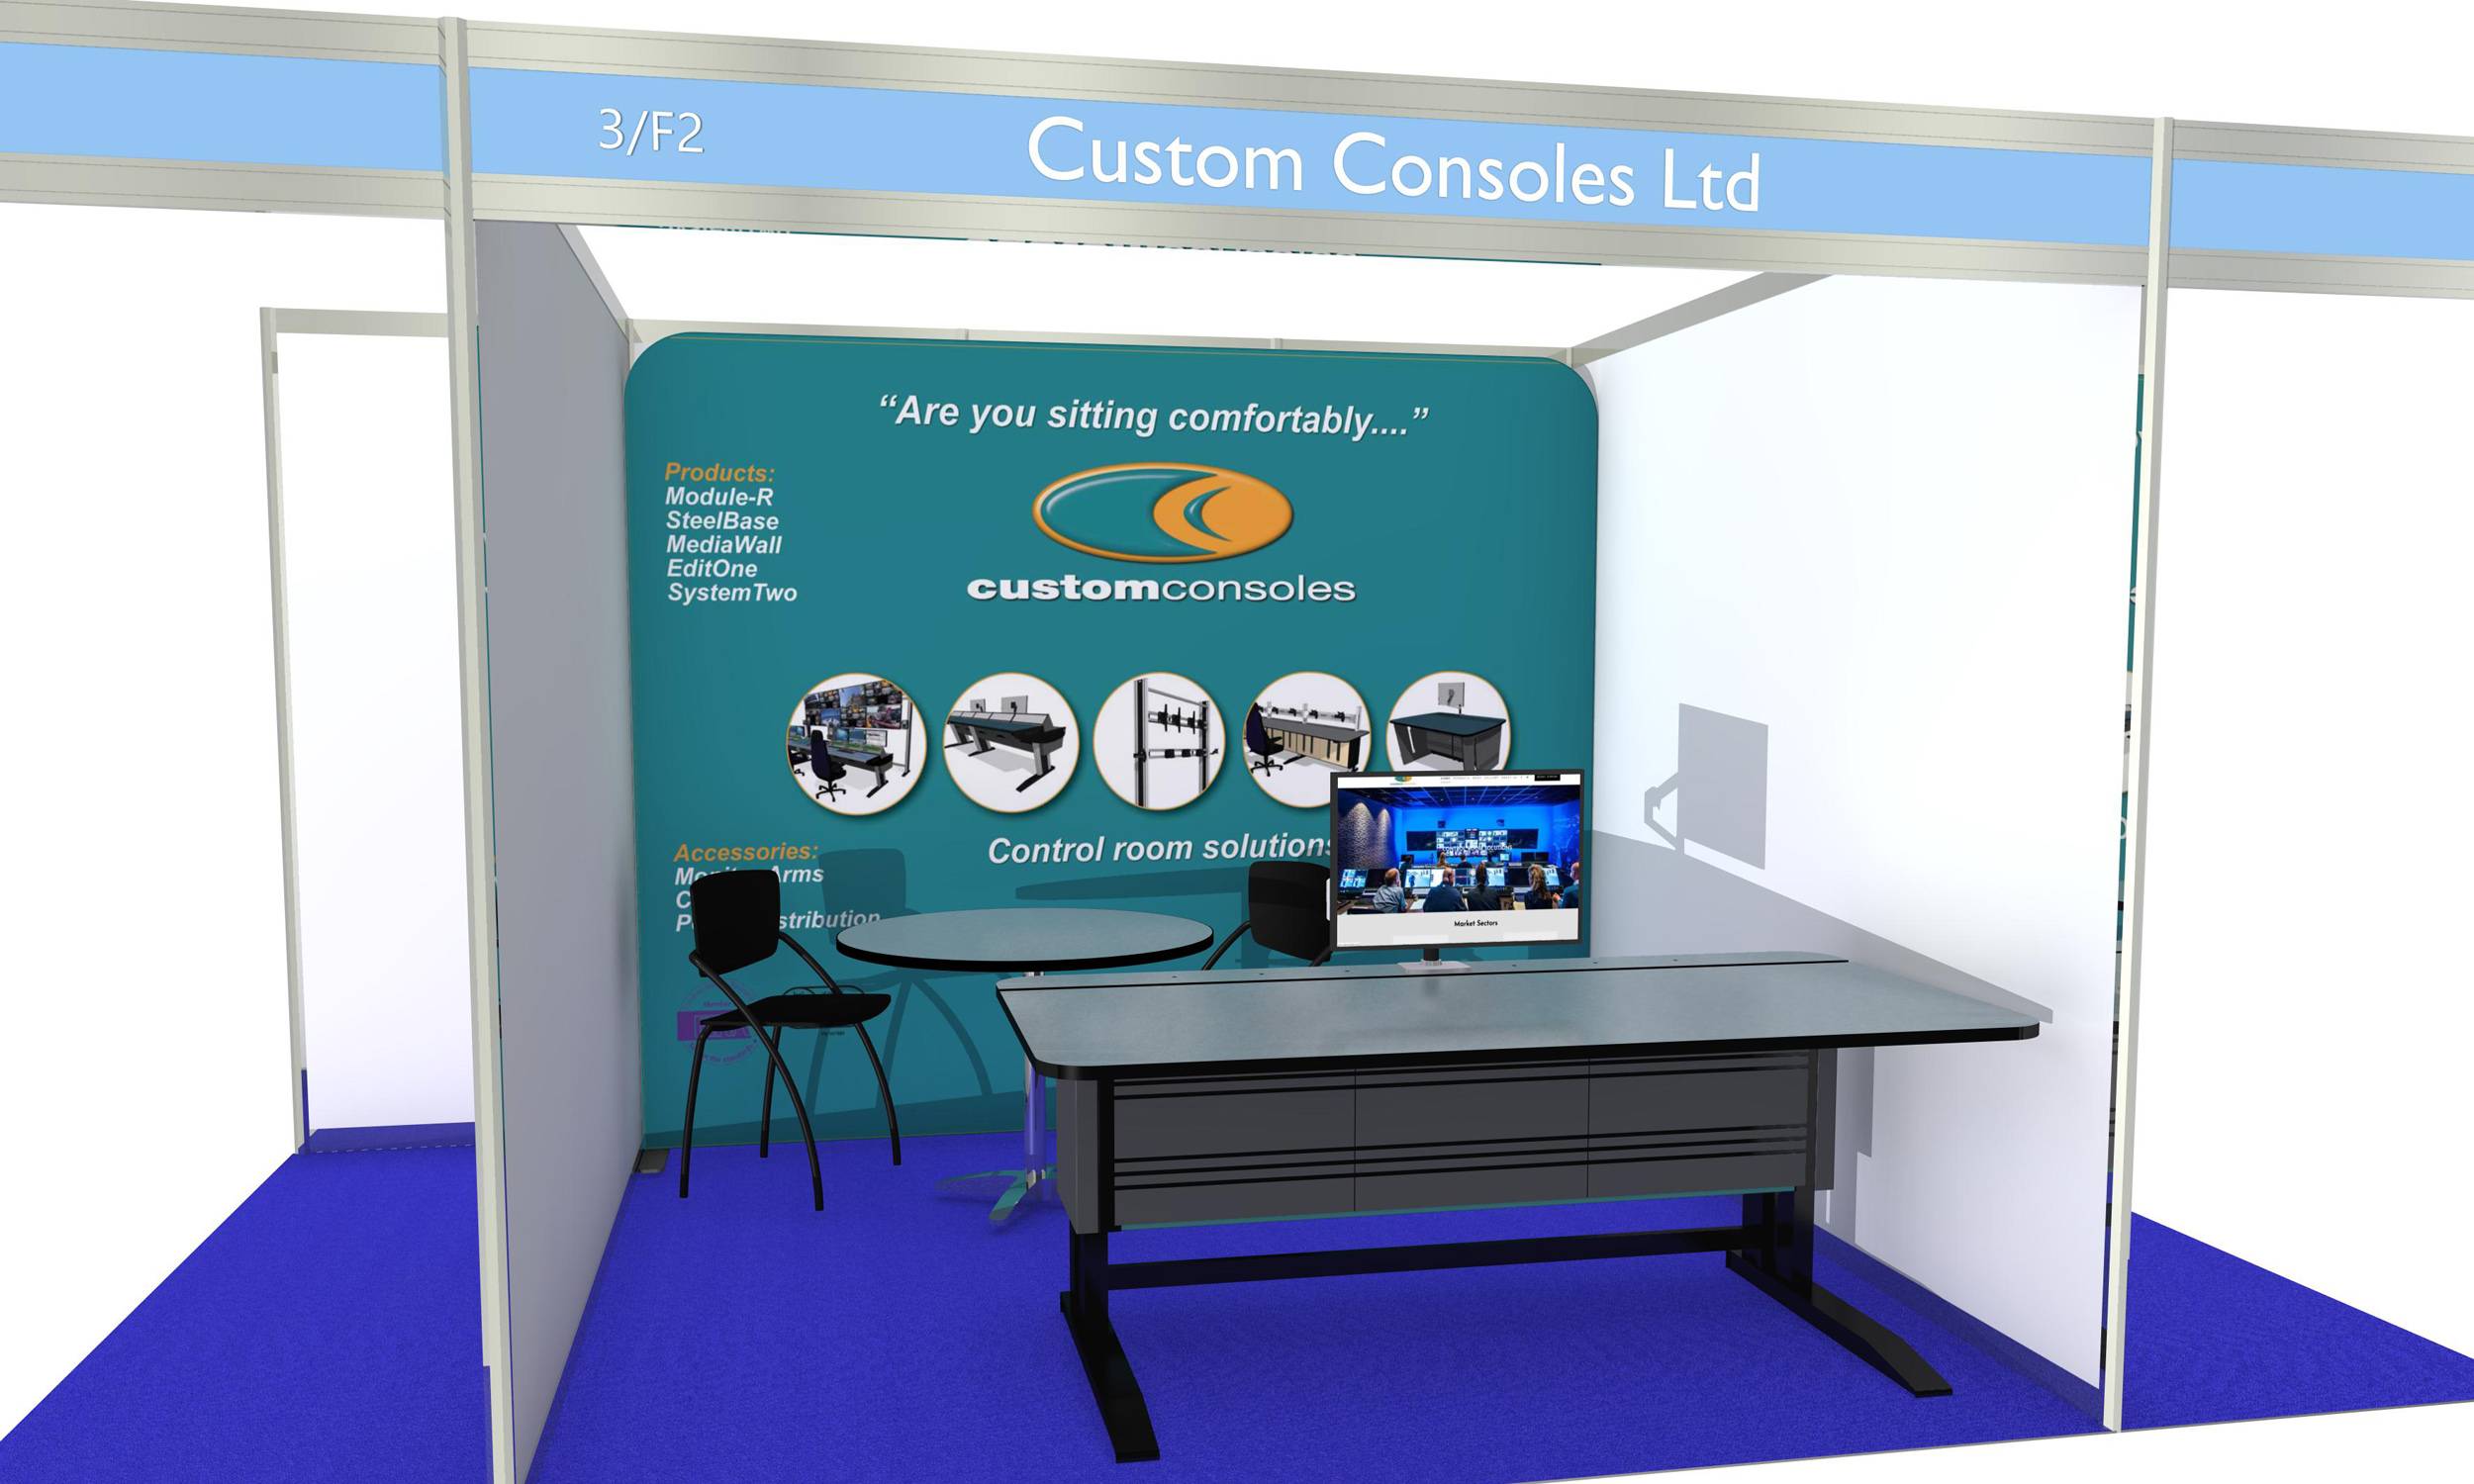 Custom Consoles to promote latest SteelBase Security Control Desk and MediaWall at The Security Event